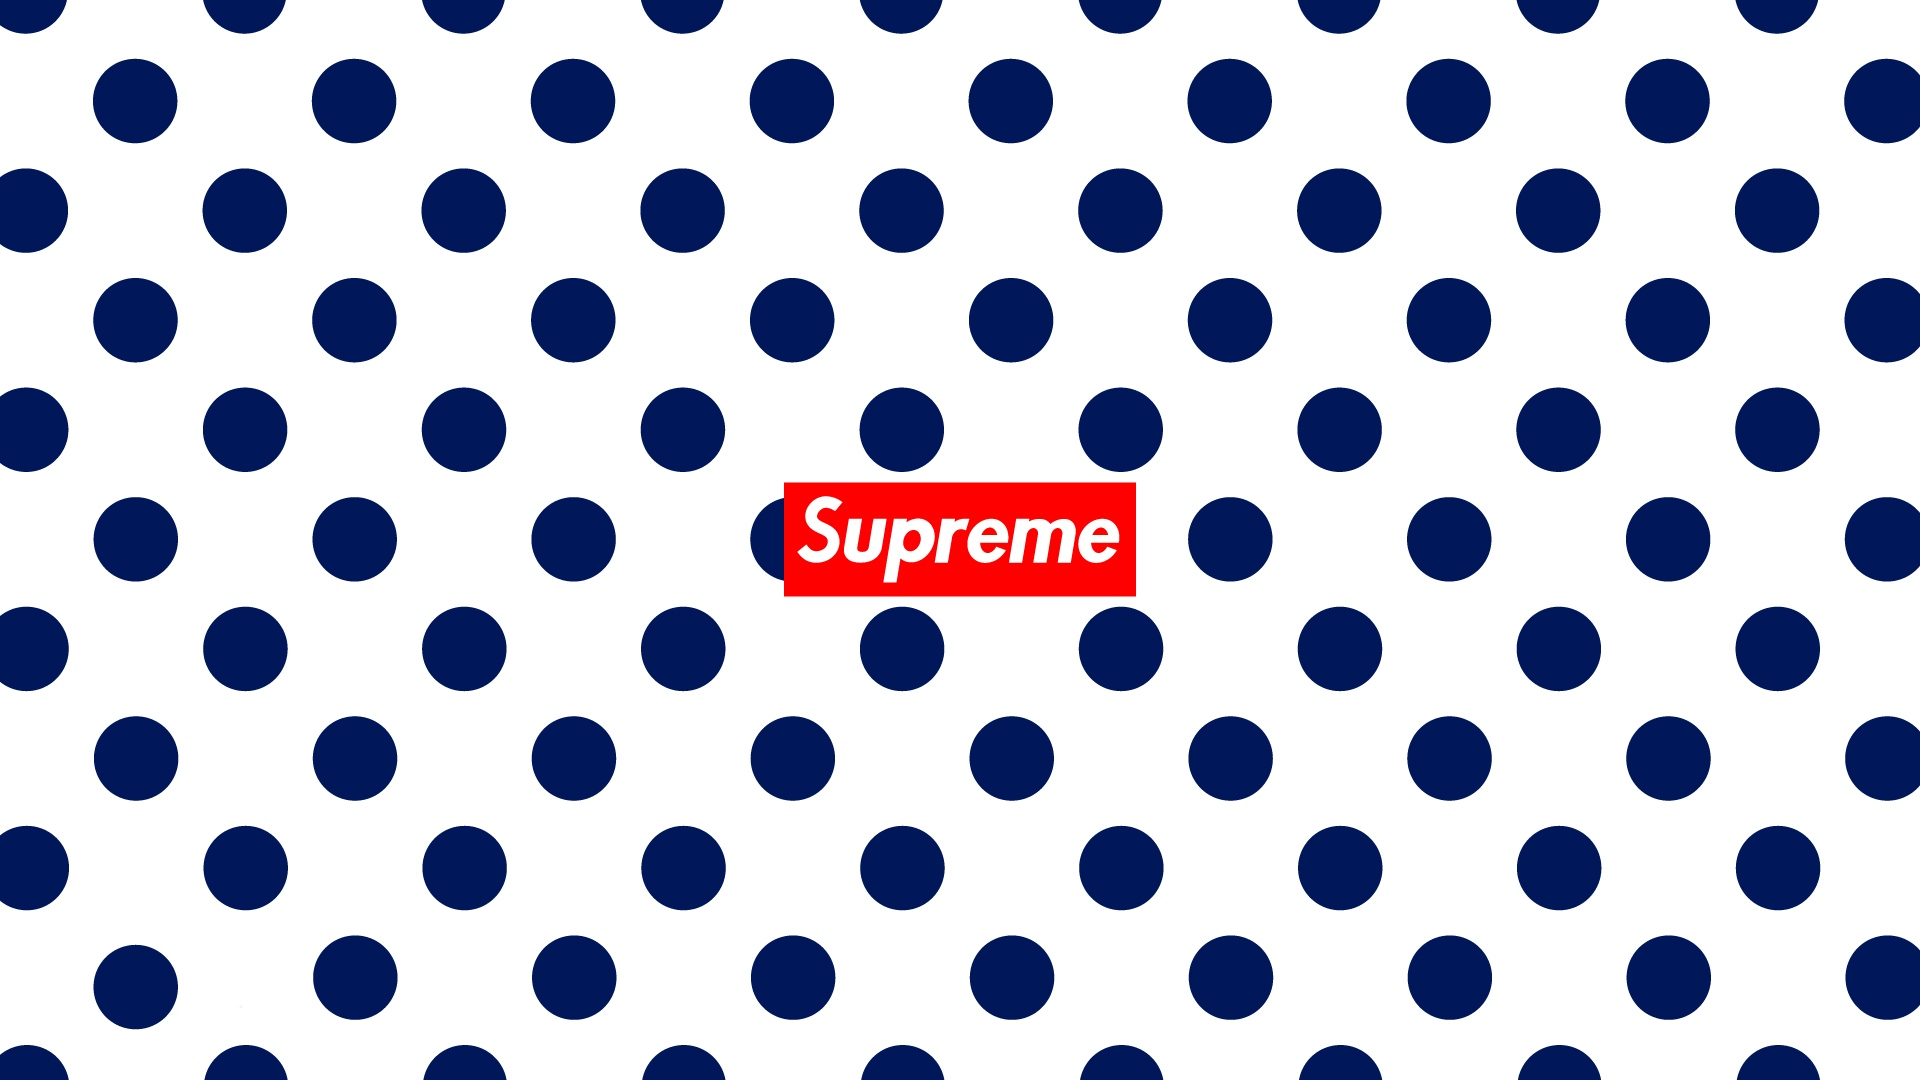 10+ Supreme HD Wallpapers and Backgrounds